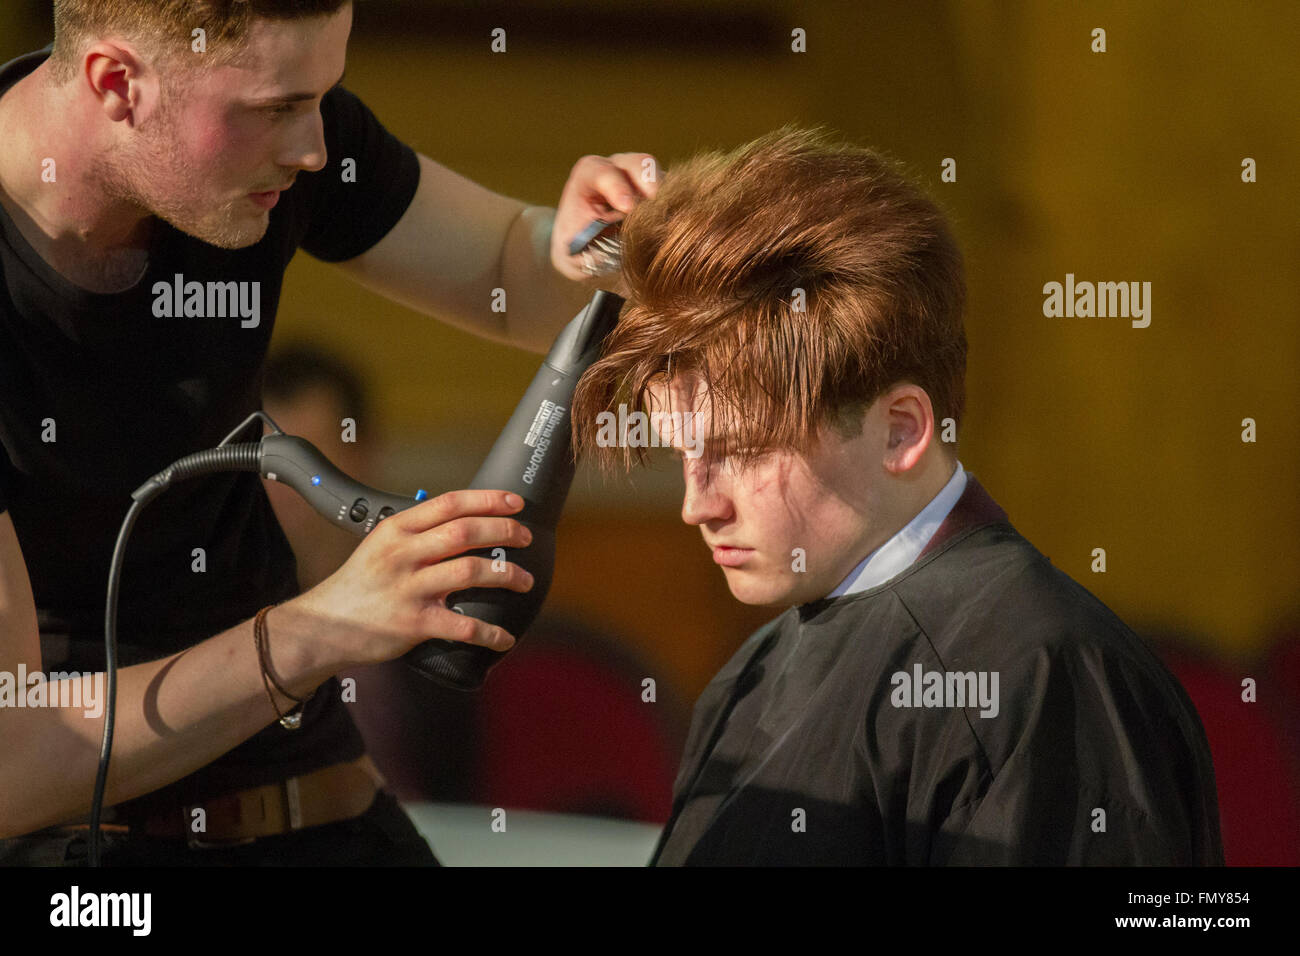 Male stylist blow drying hair in Blackpool March, 2016. Wintergardens Mens Hairdressing Competitions. Hair & Beauty NW is the North West's longest running major hair and beauty event, a venue for exciting competitions held by the National Hair Federation (N.H.F). The National Hairdressers' Federation is a trade industry group representing hairdressing salon owners in the United Kingdom. Stock Photo